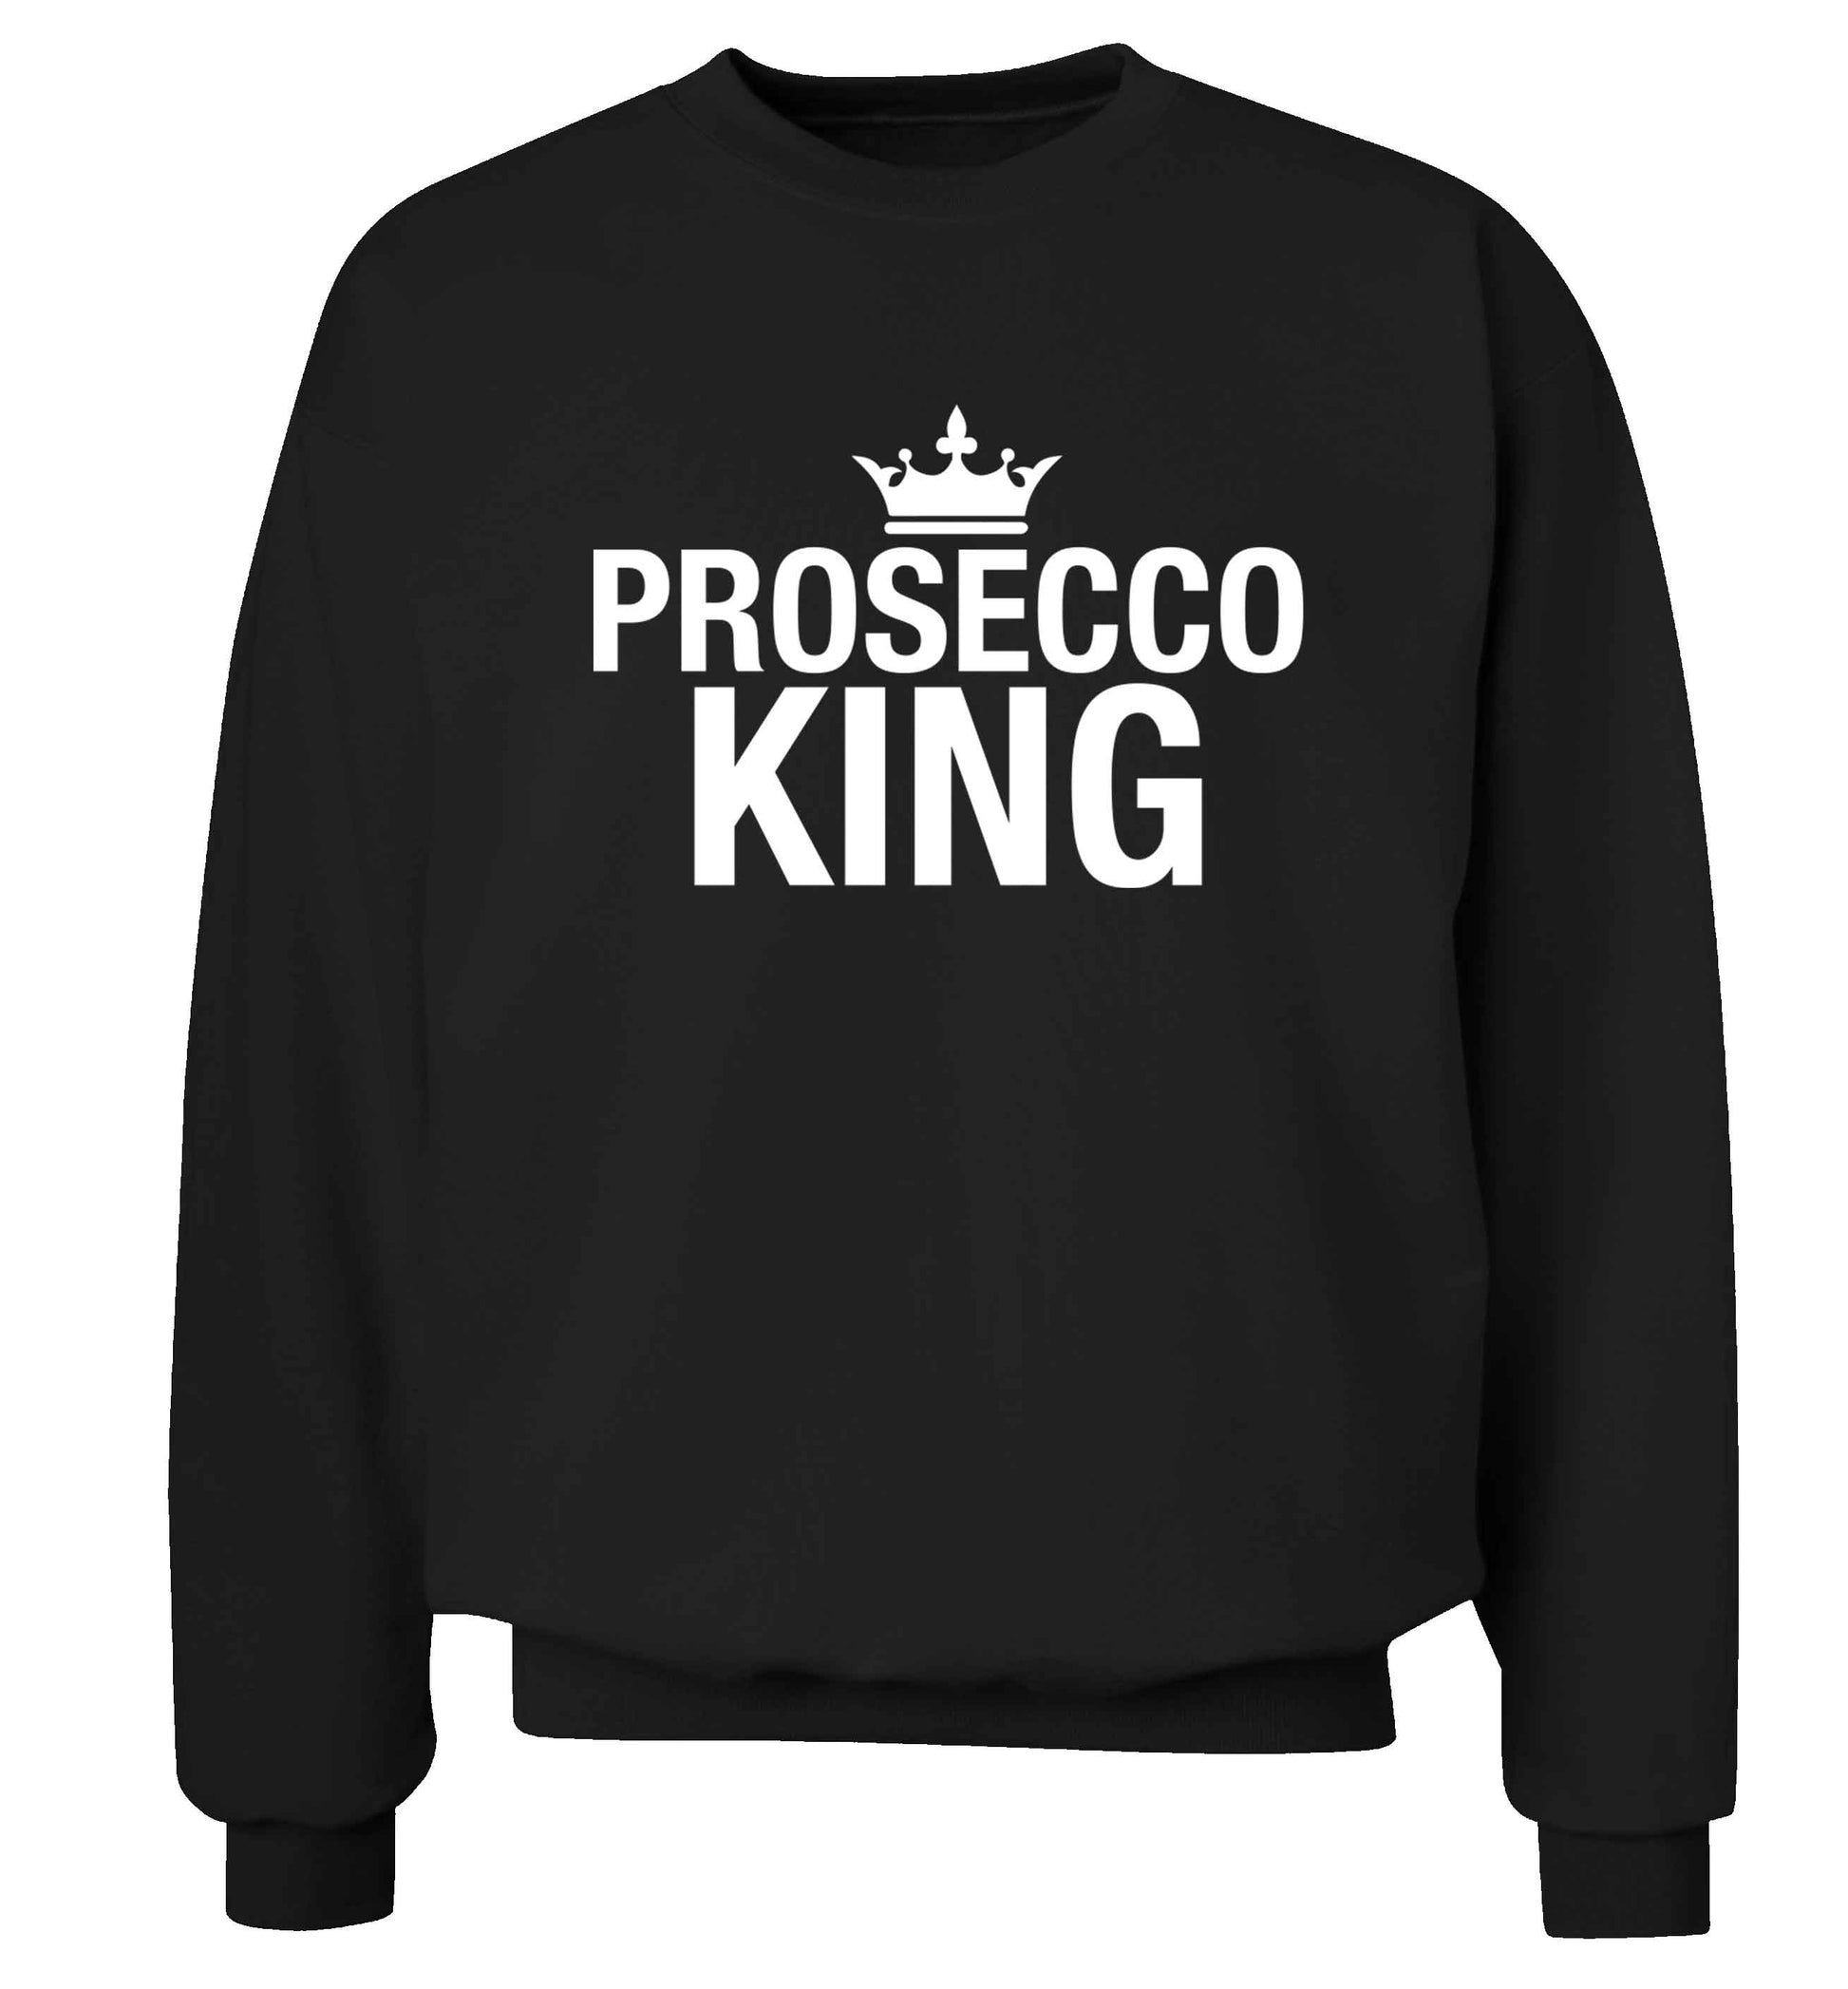 Prosecco king Adult's unisex black Sweater 2XL